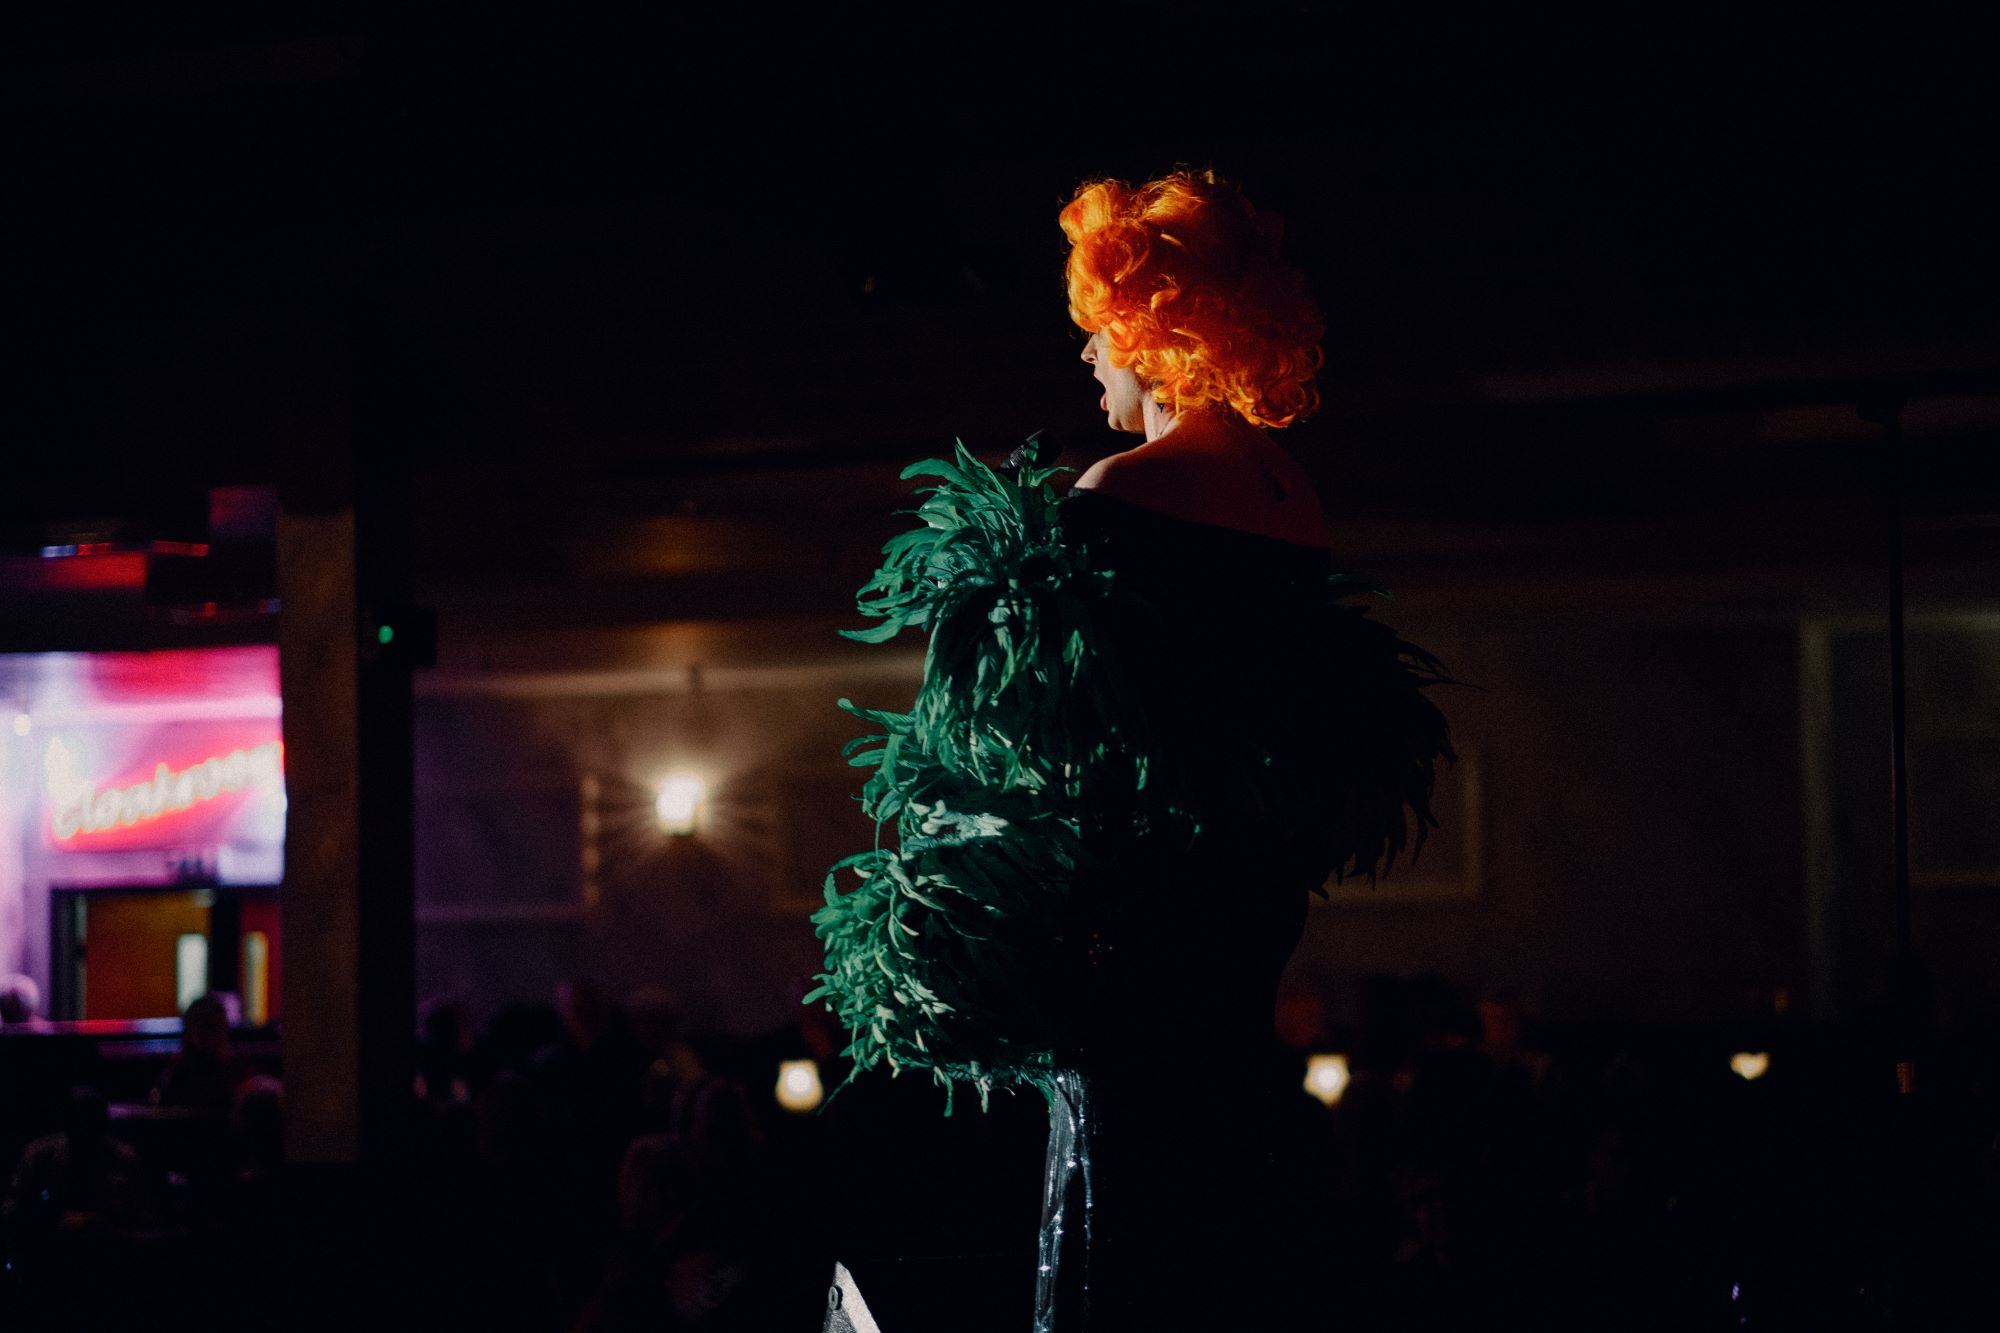 Photo shows drag artist in striking green feather dress and ginger wig performing on stage, the photo is taken from behind the artist in two thirds profile looking out towards the audience